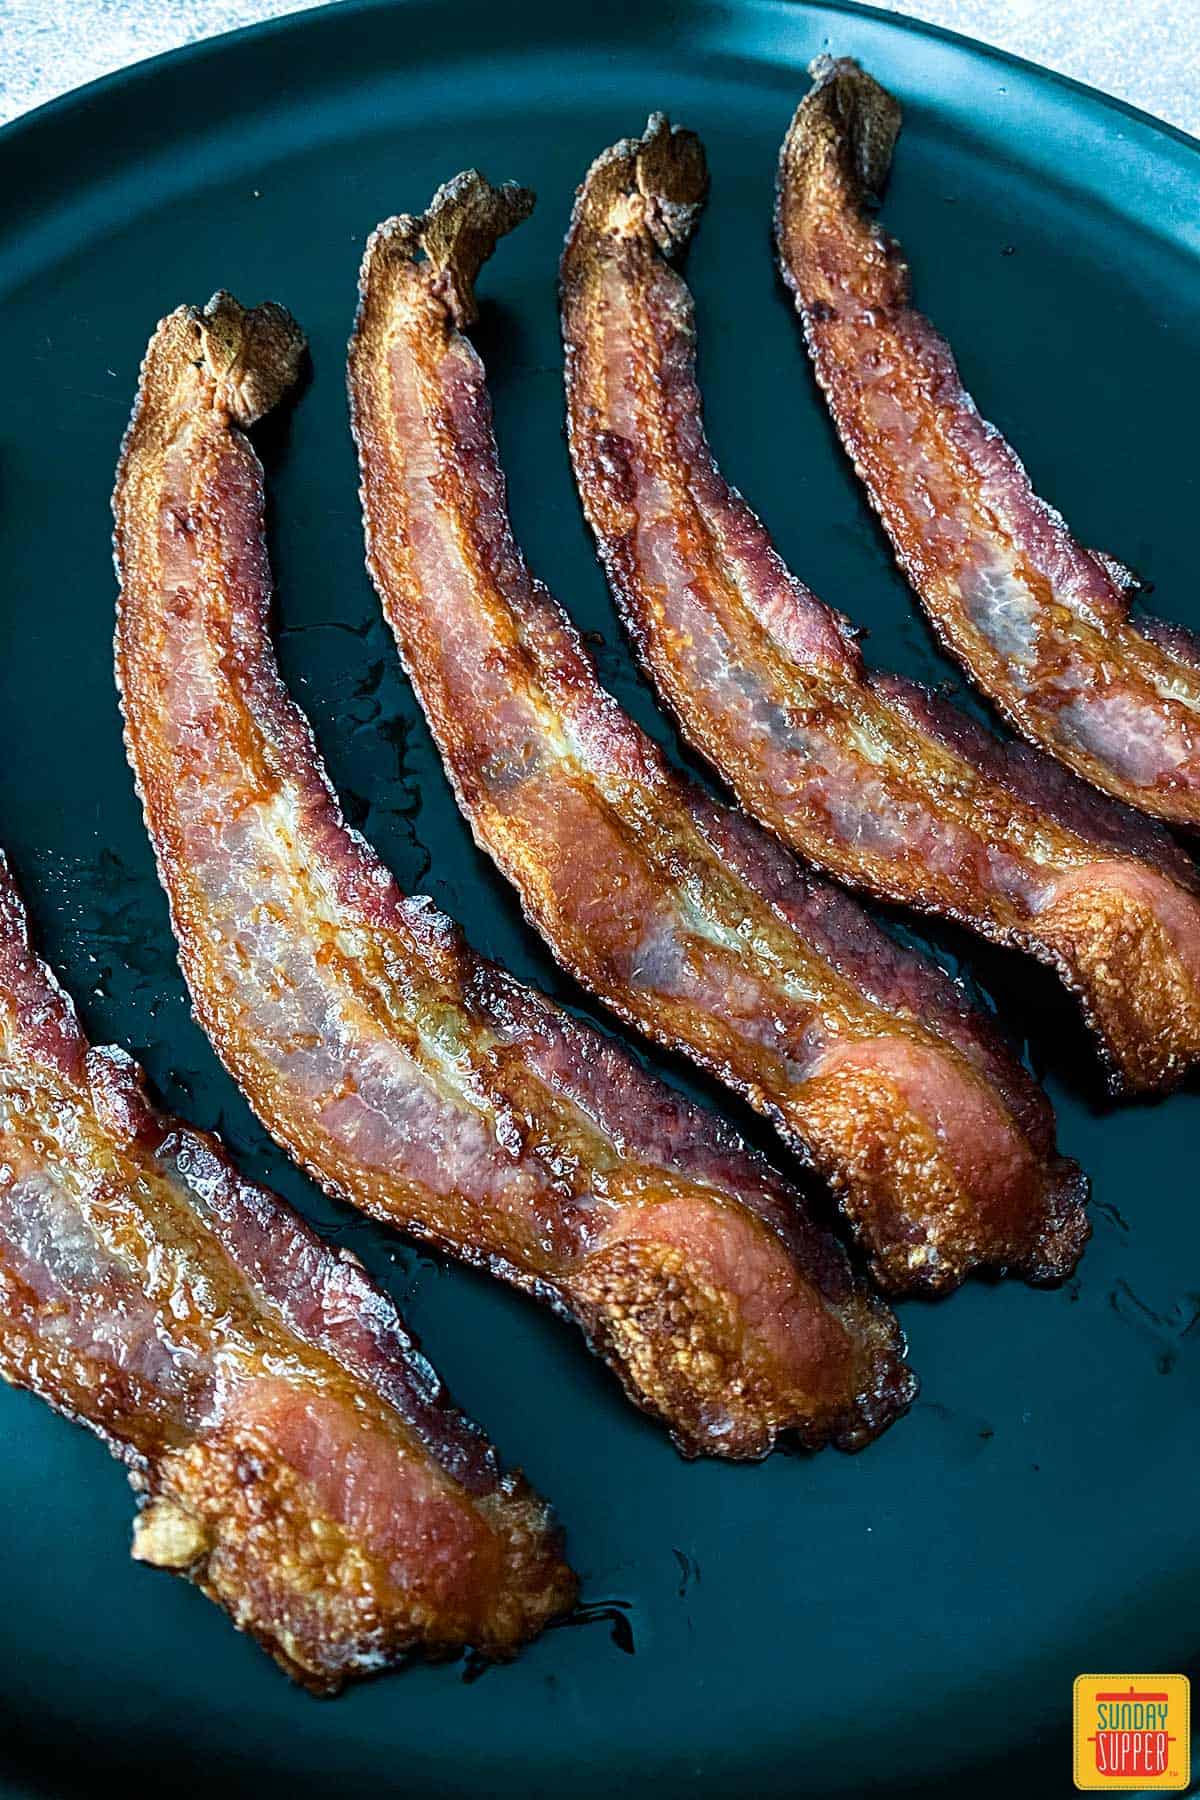 Strips of air fried bacon on a black plate